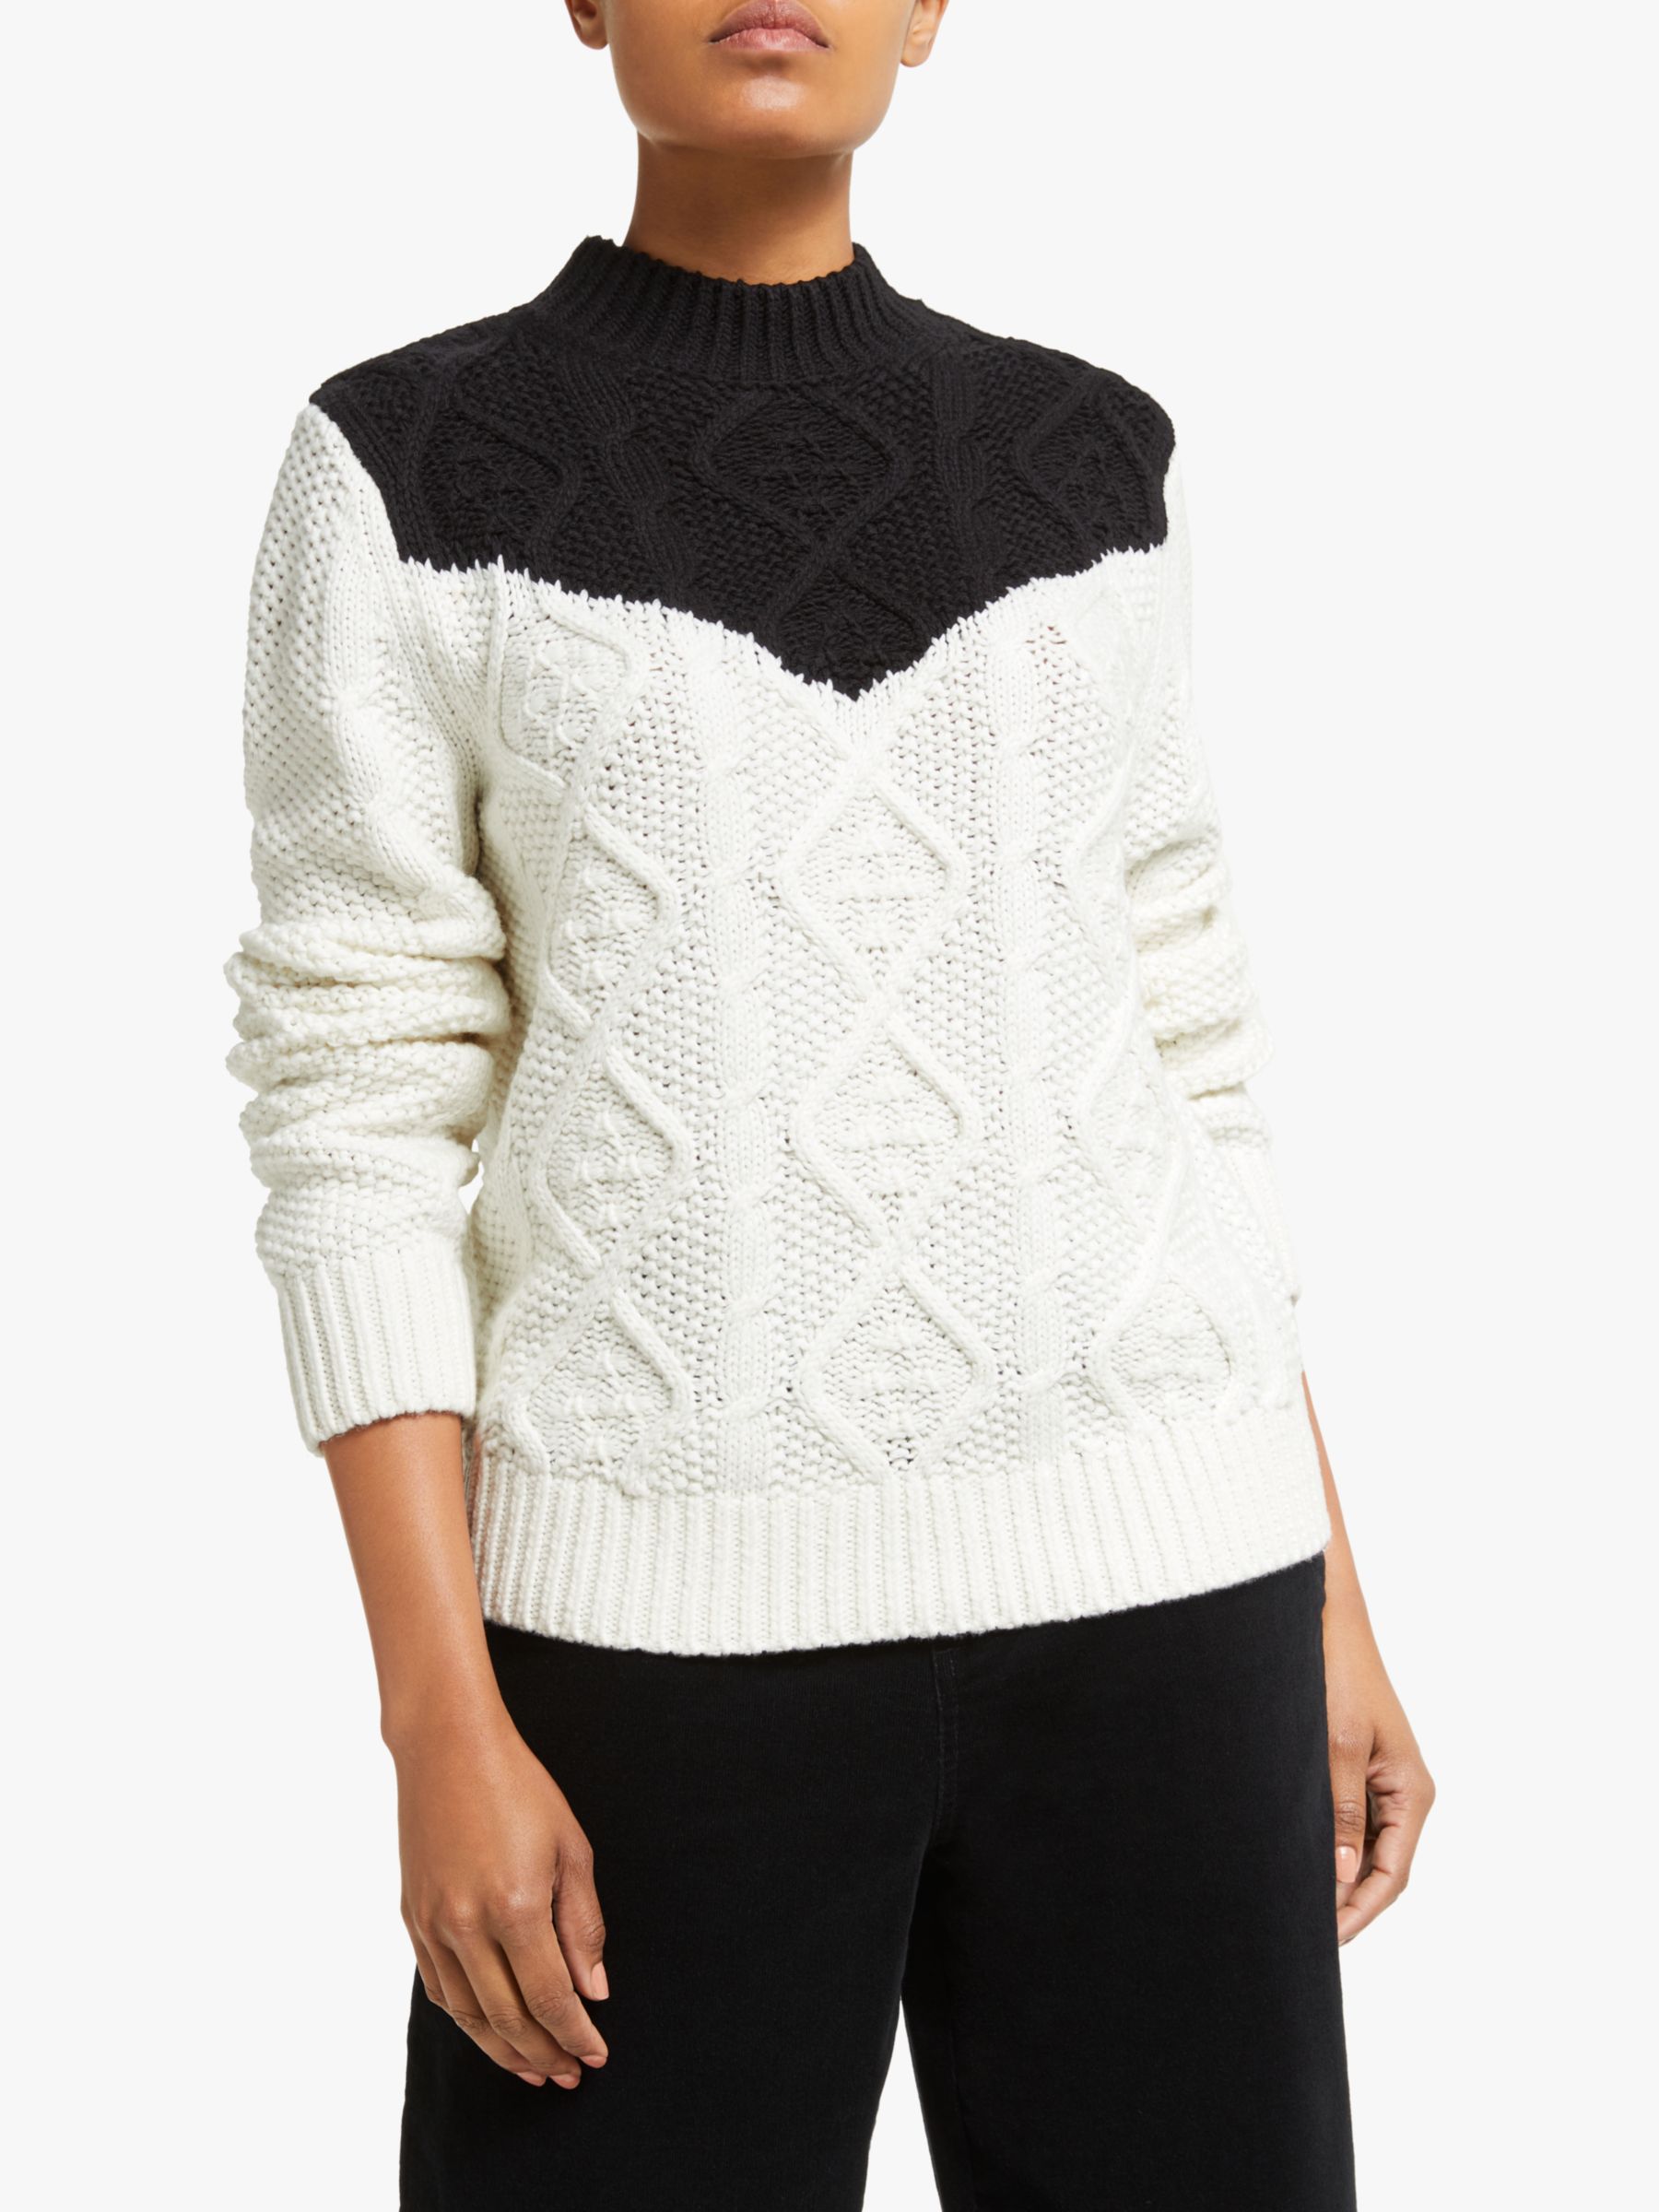 Collection WEEKEND by John Lewis Contrast Chunky Cable Knit Jumper, Black/White